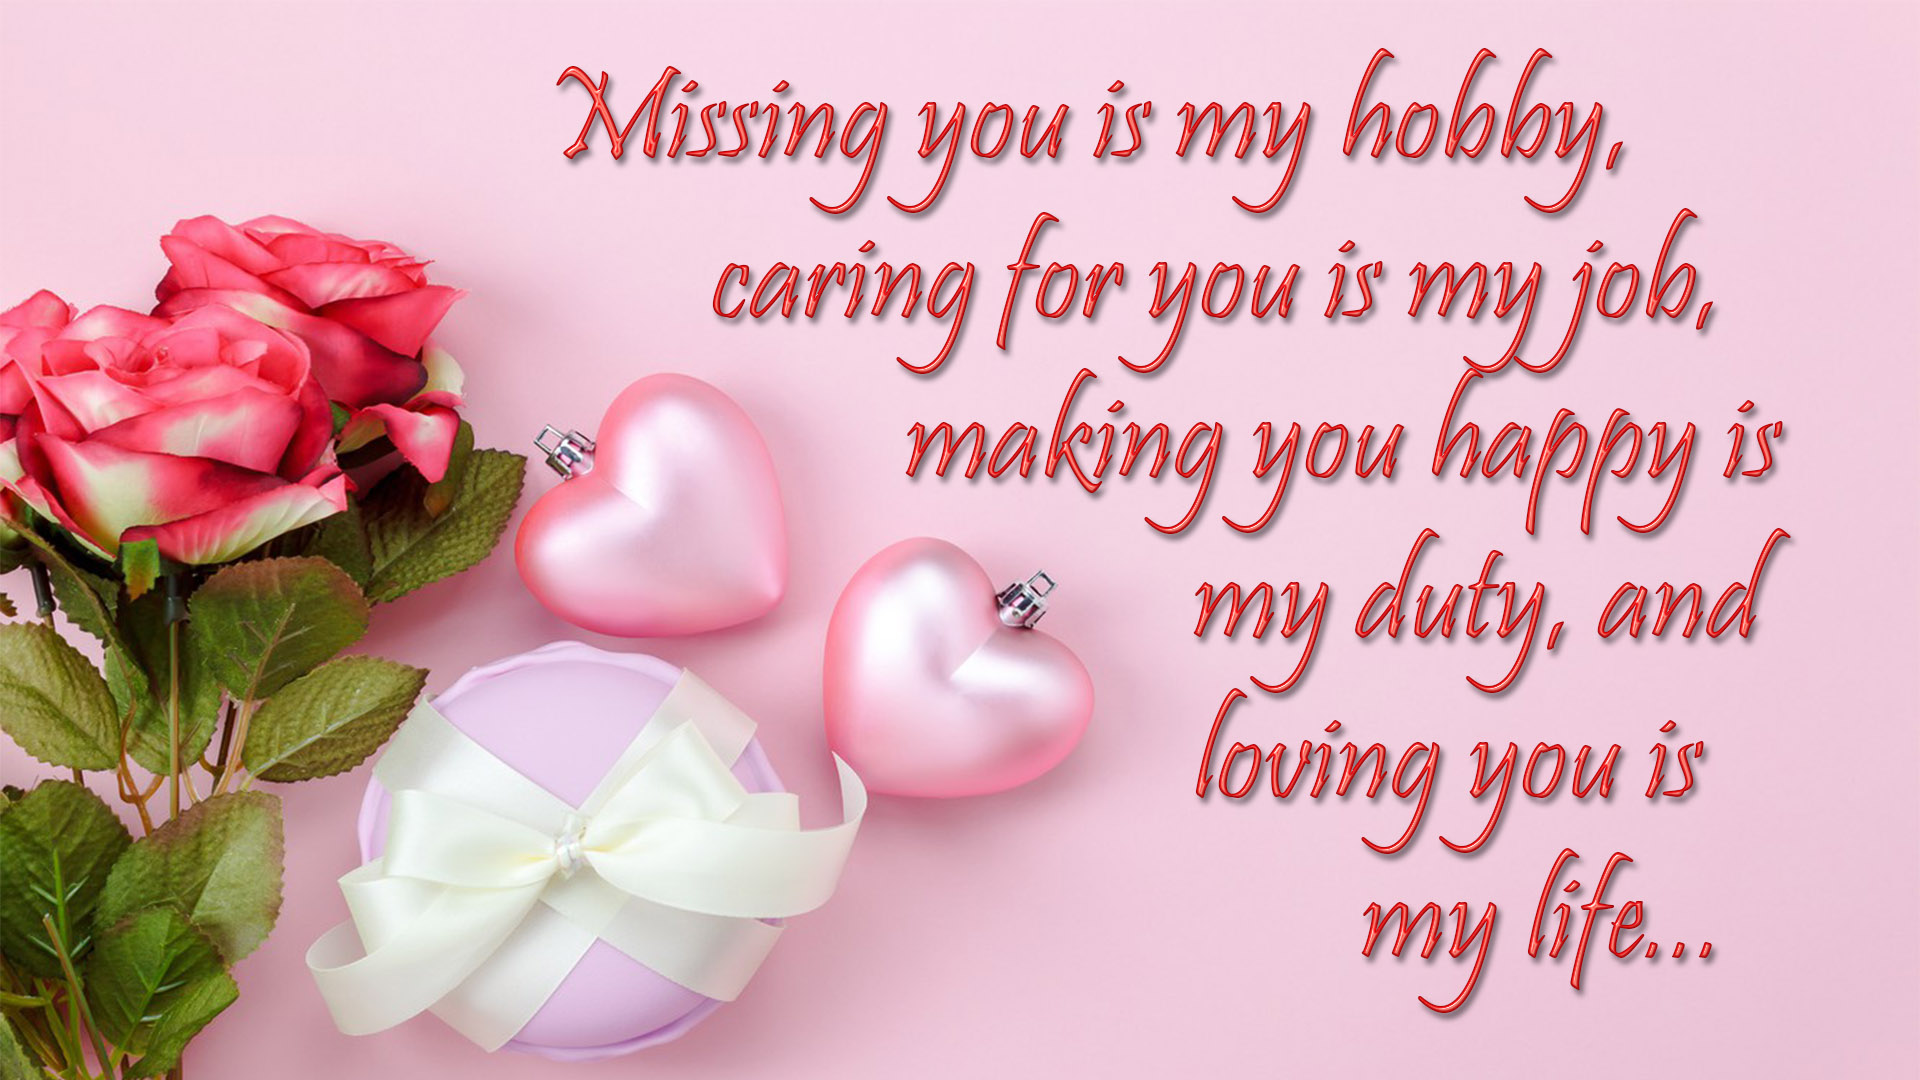 missing you messages image 2019